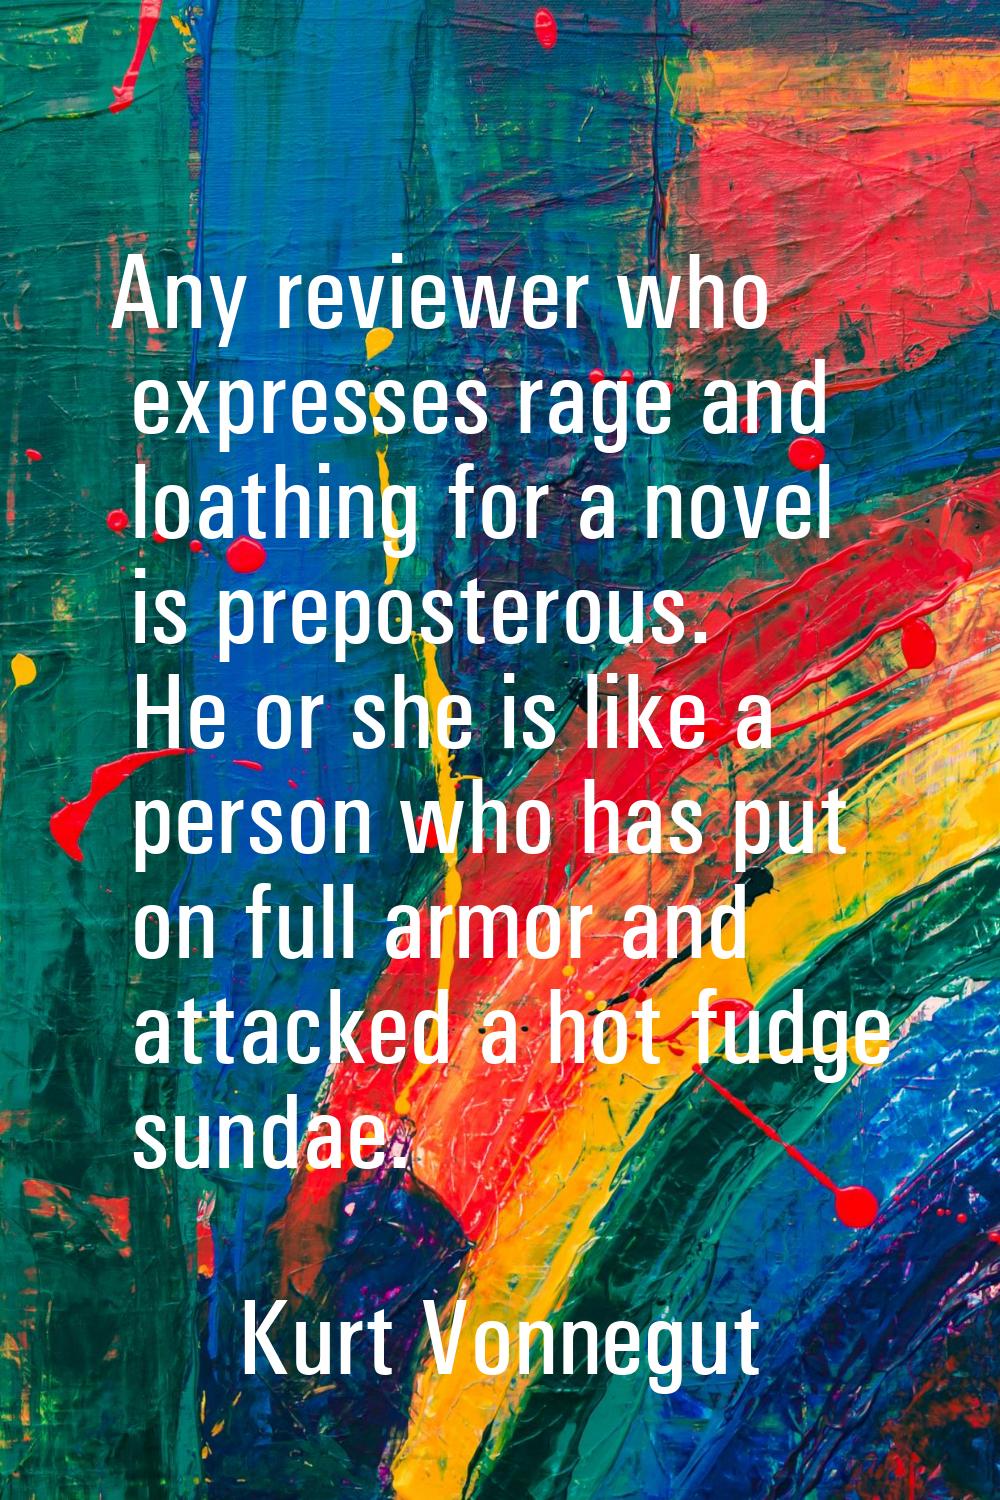 Any reviewer who expresses rage and loathing for a novel is preposterous. He or she is like a perso